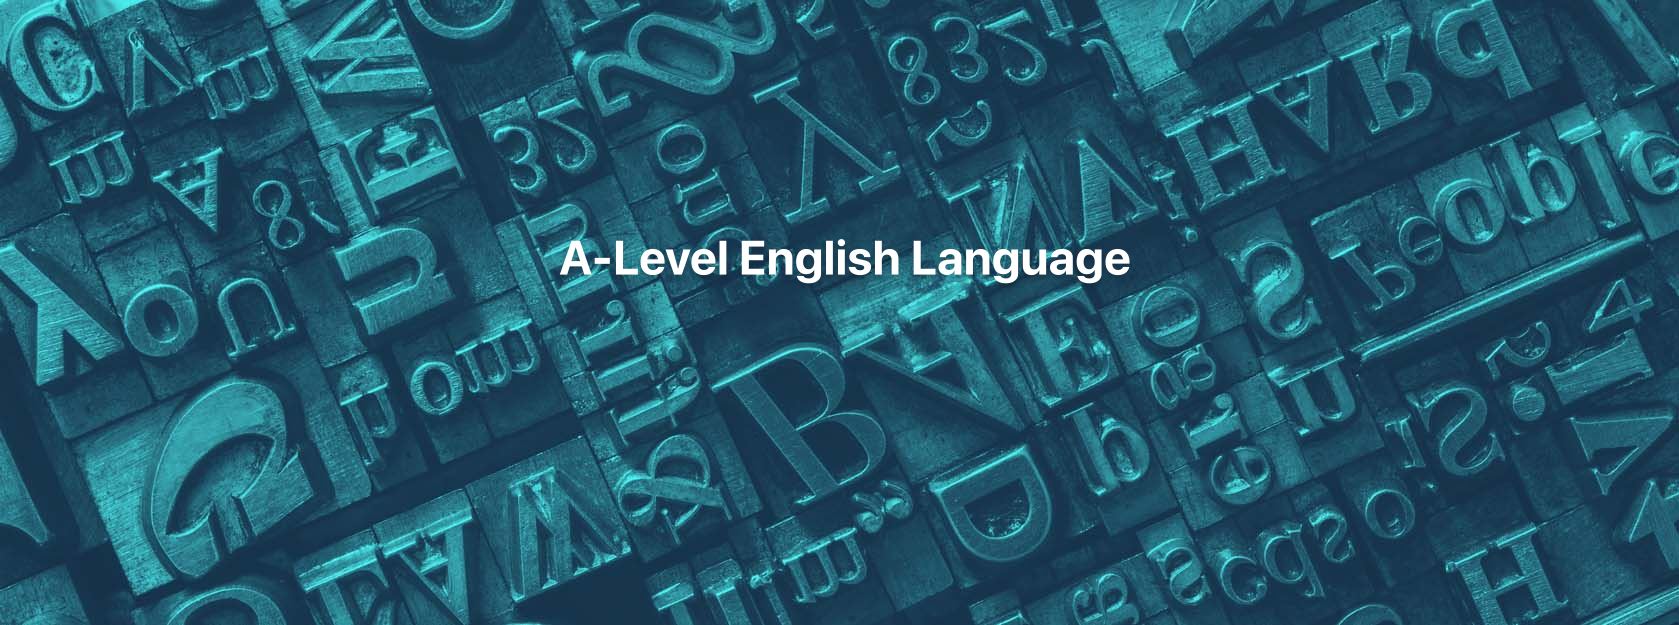 A-Level English Language Distance Learning Course by Oxbridge